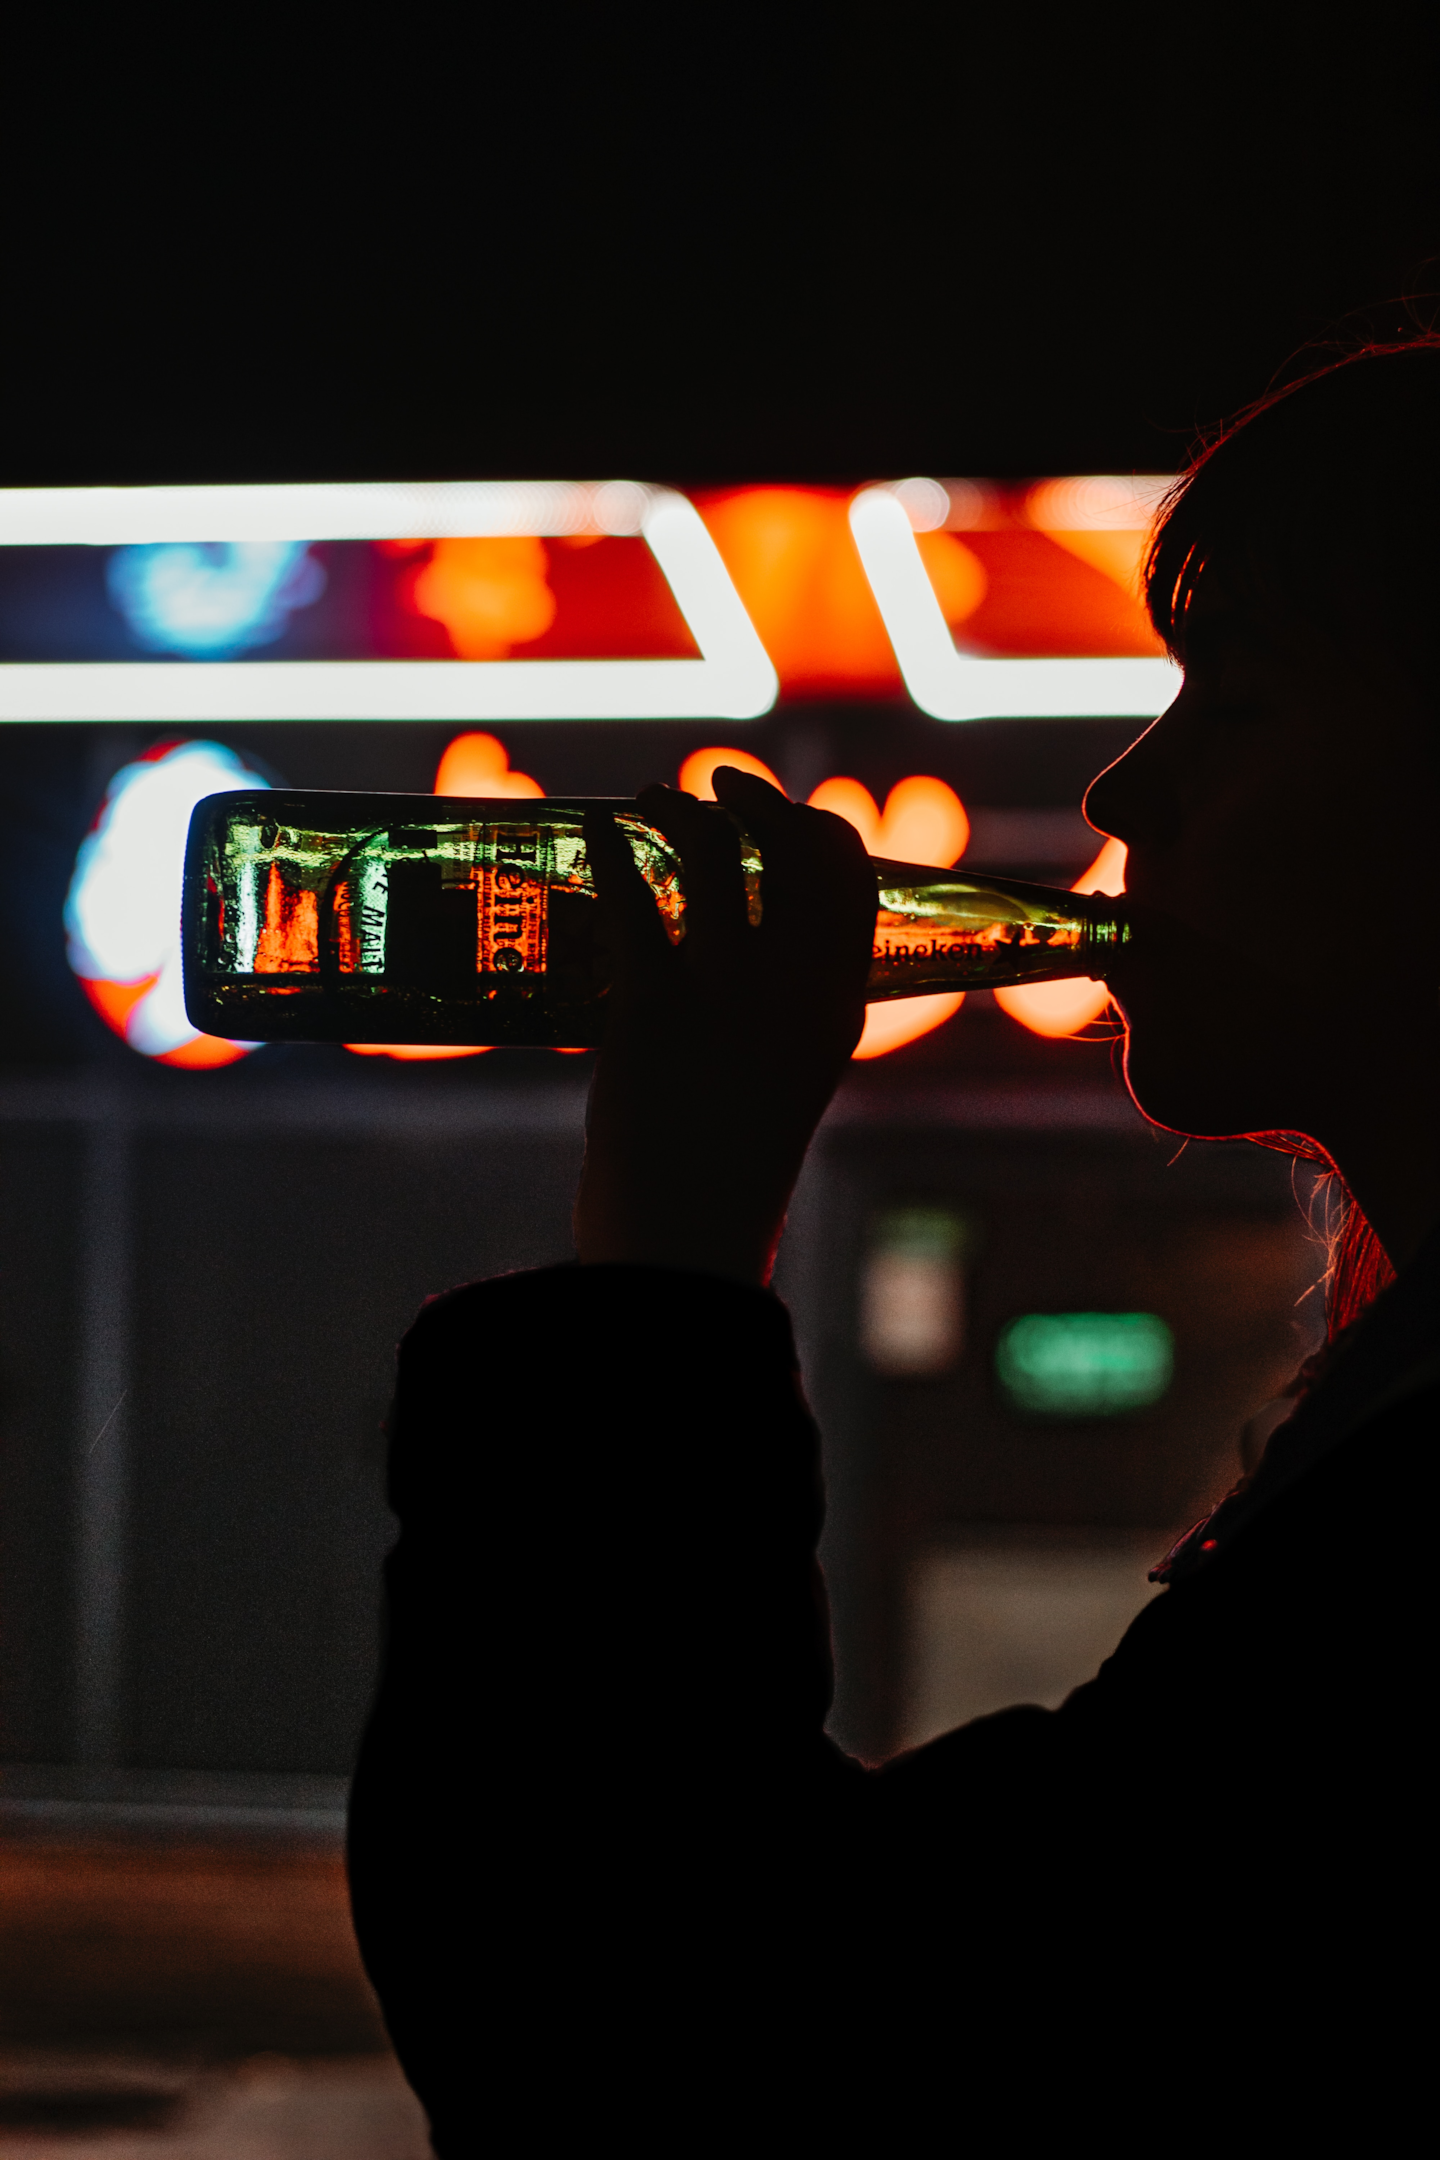 A DWI is typically a class B misdemeanor, but can be a felony if there are two or more prior convictions.